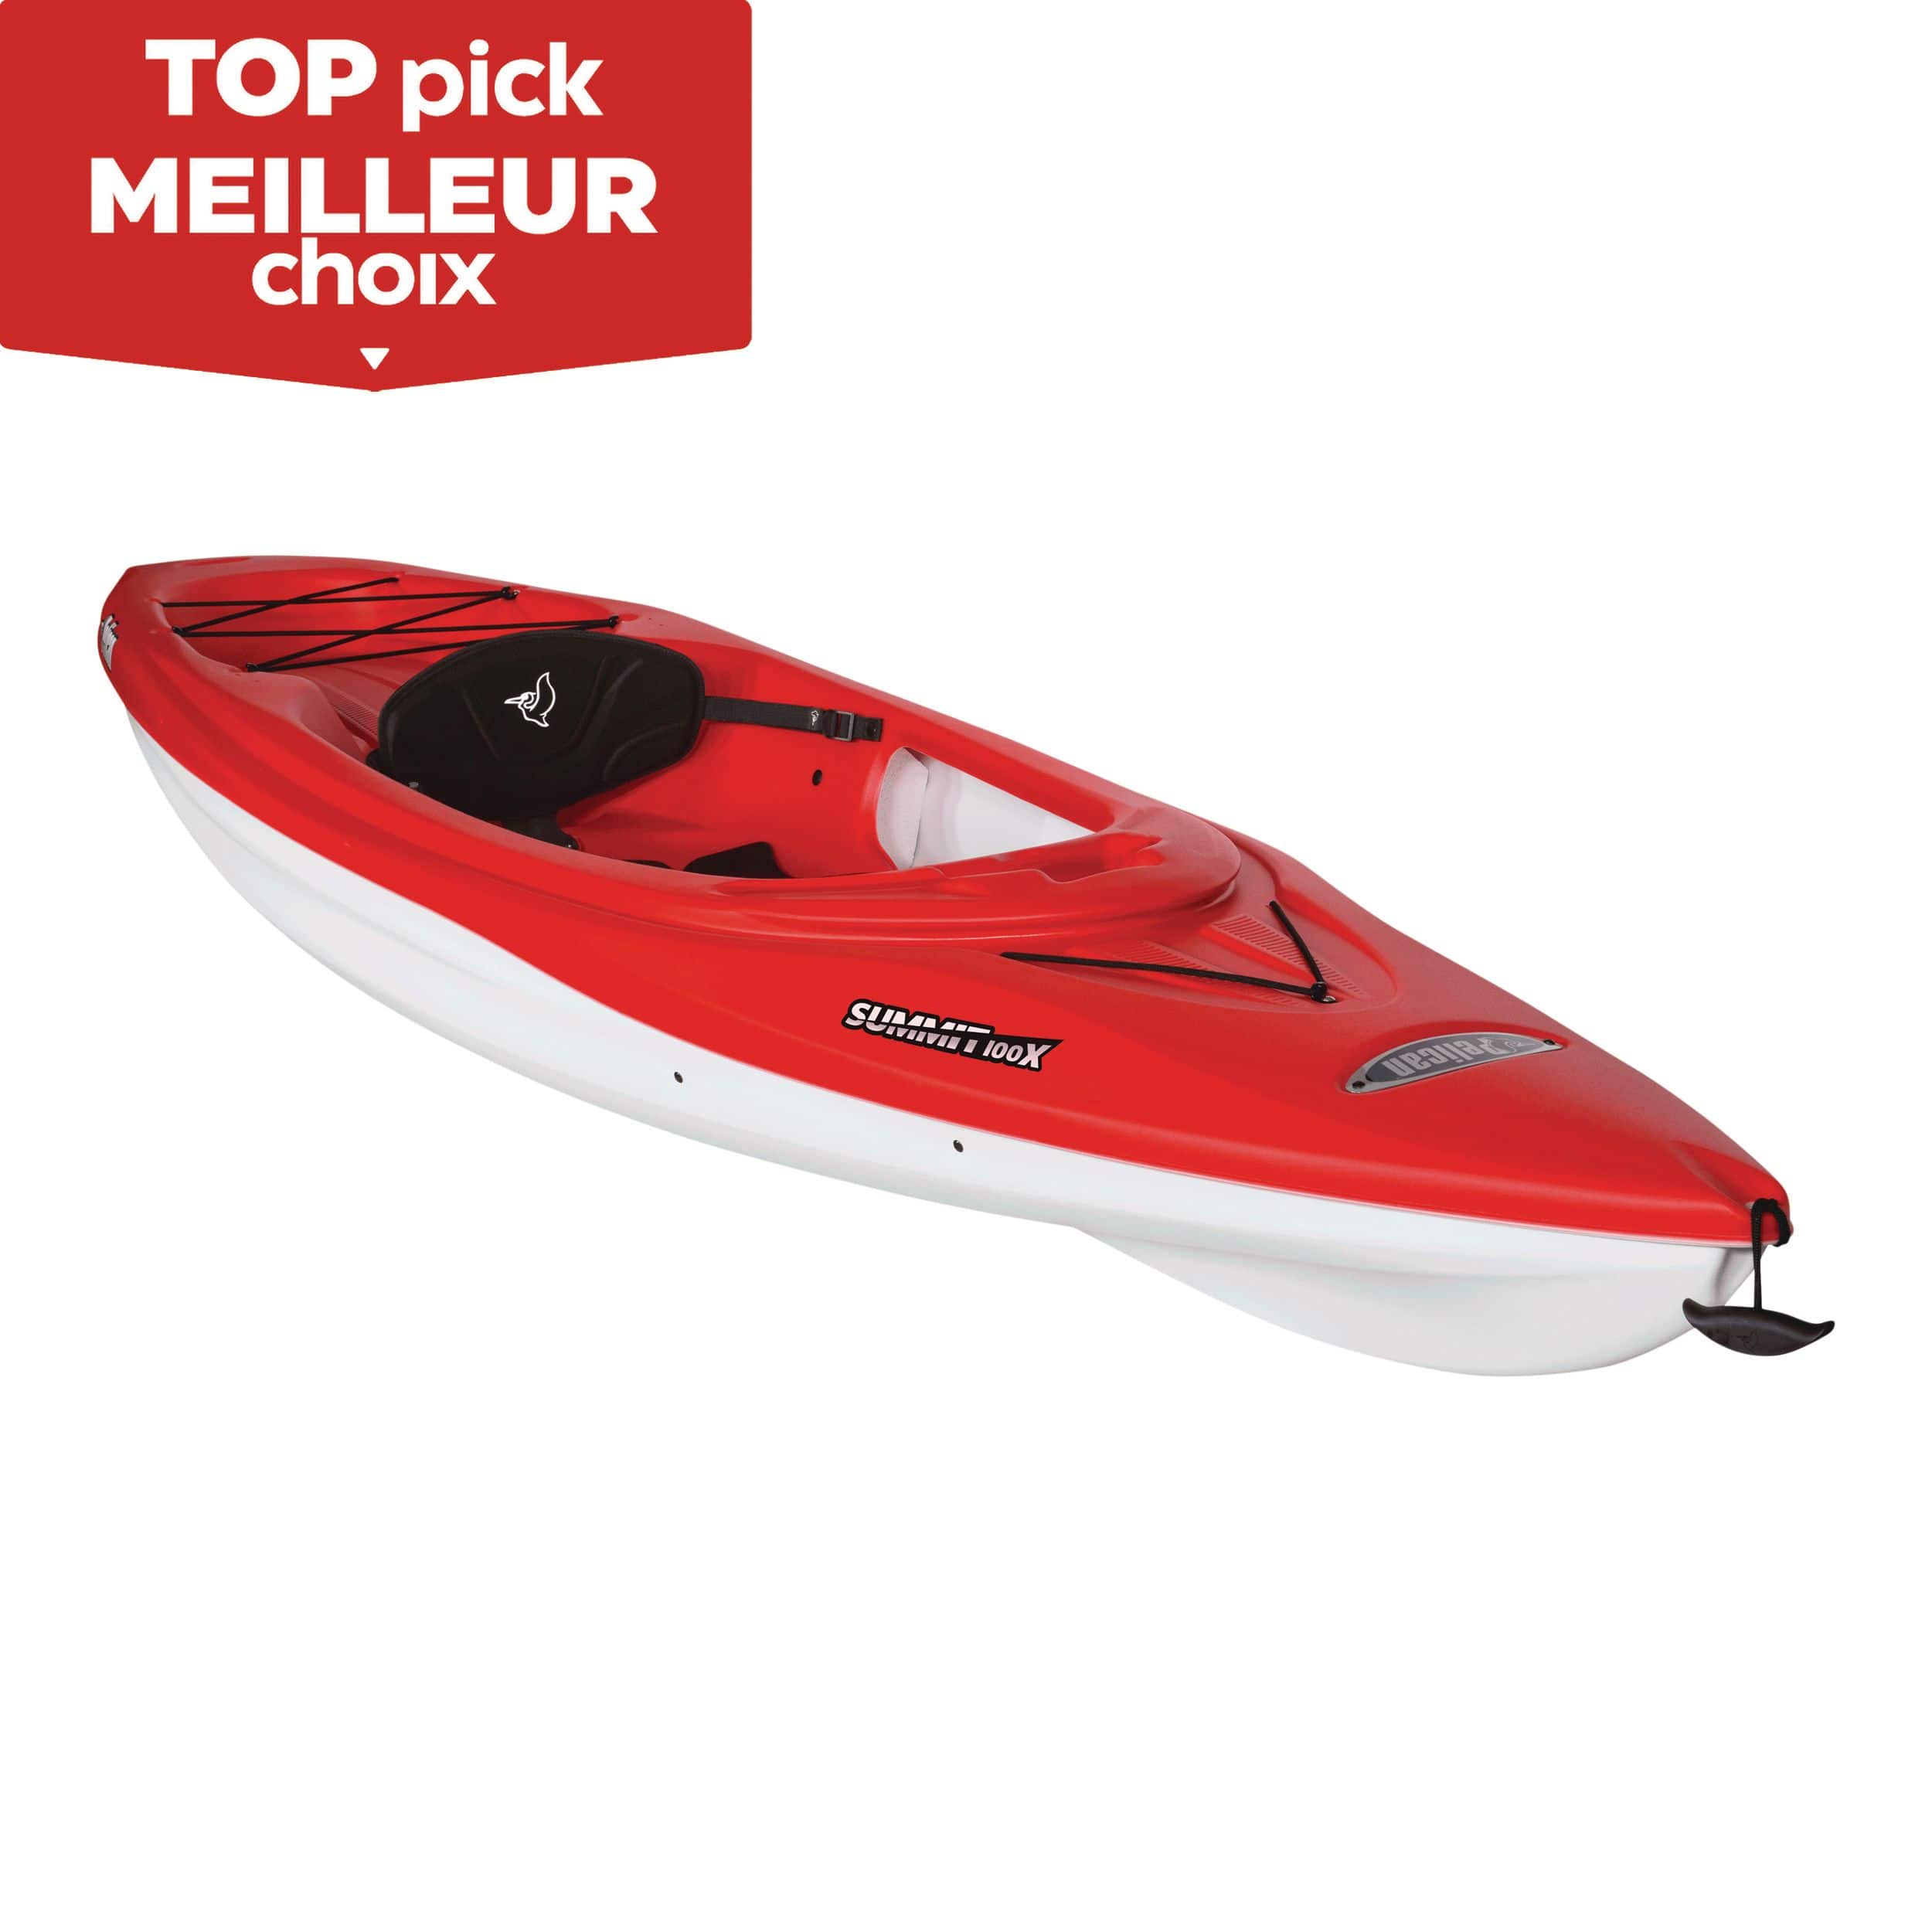 Pelican Summit 100X Sit-in 1-Person Kayak, Fireman Red/White, 10-ft